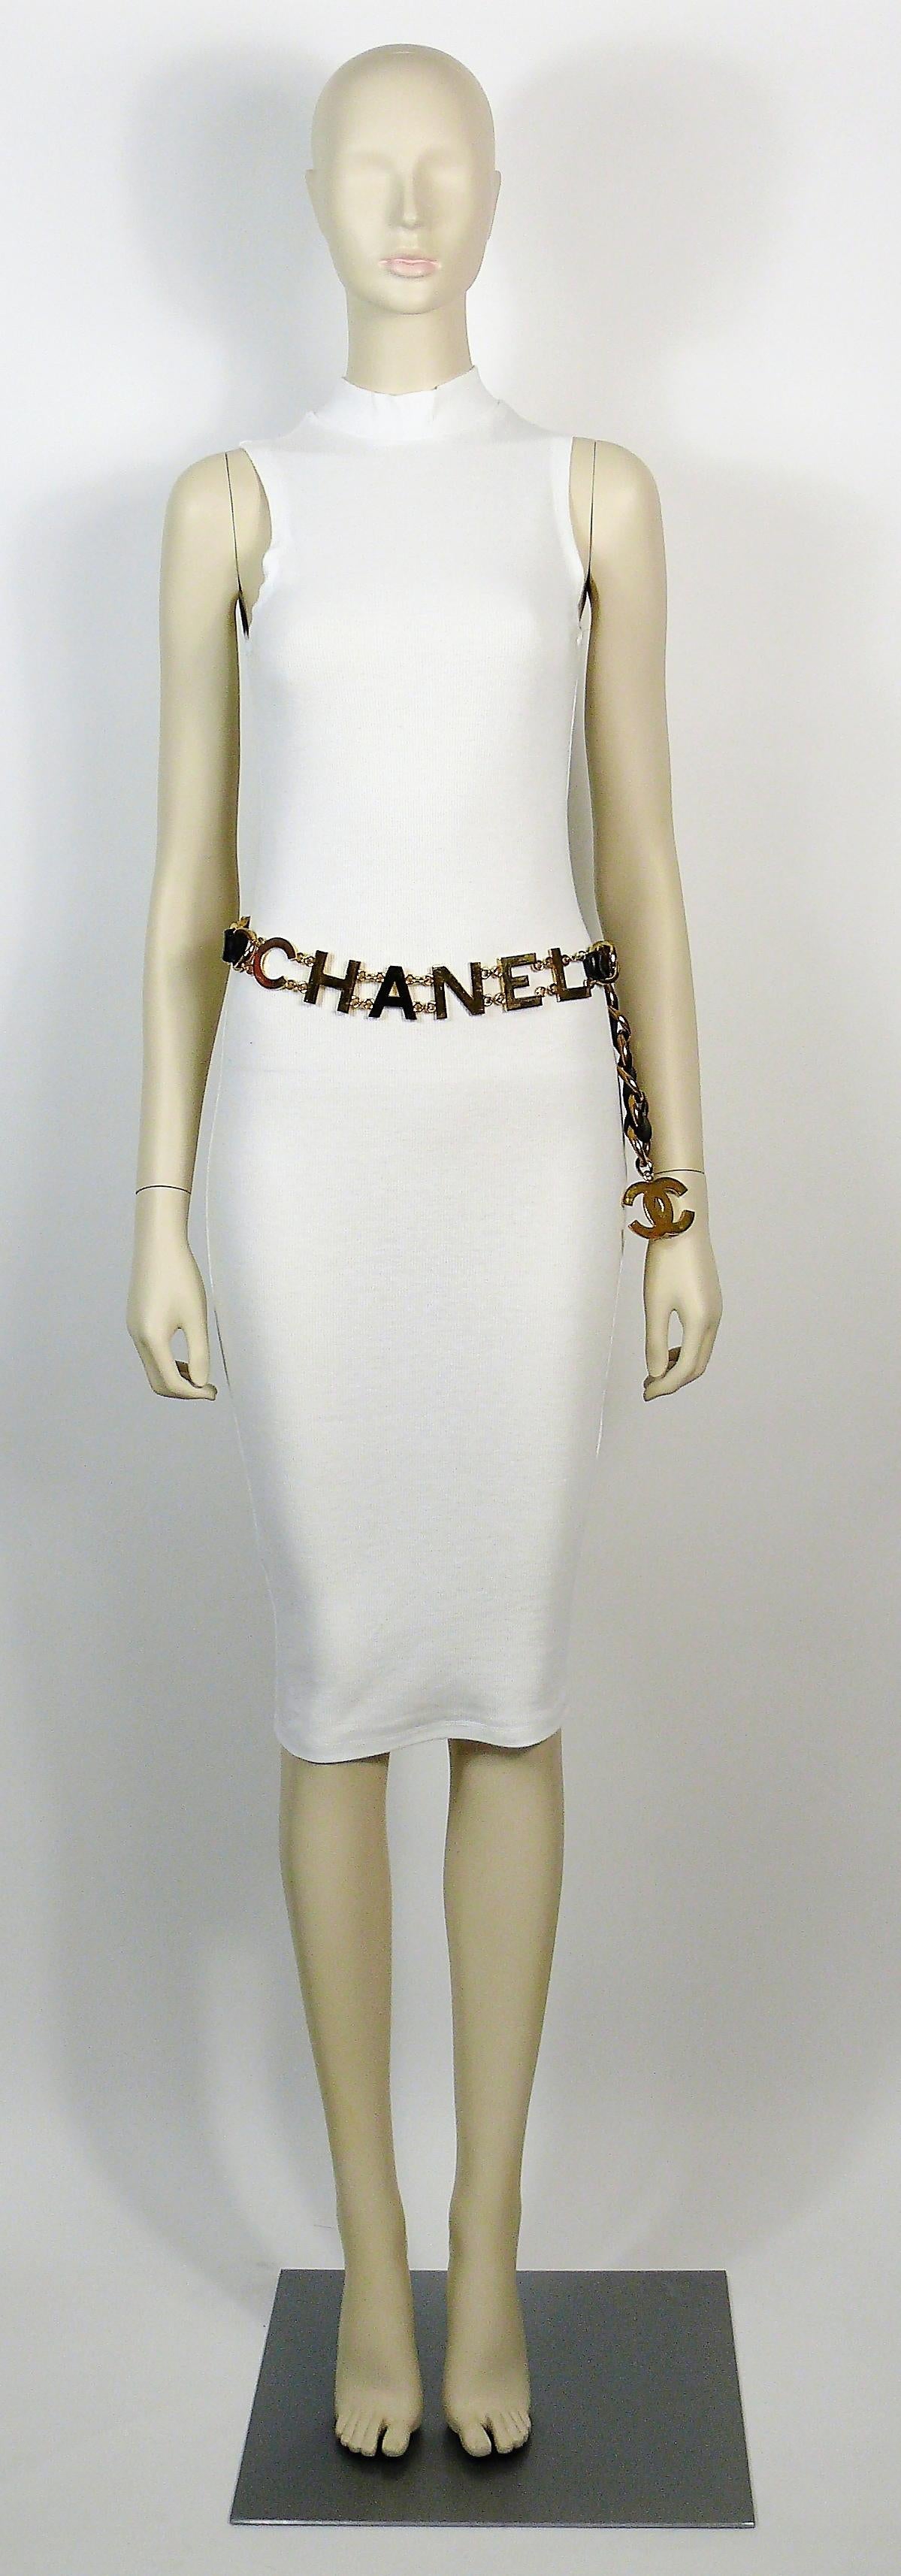 CHANEL vintage rare and iconic gold toned chain belt featuring spell out C O C O  C H A N E L with black intertwined leather.

Collection 29 (year 1994).

Hook clasp.

Marked CHANEL 29 Made in France.

Indicative measurements : adjustable length